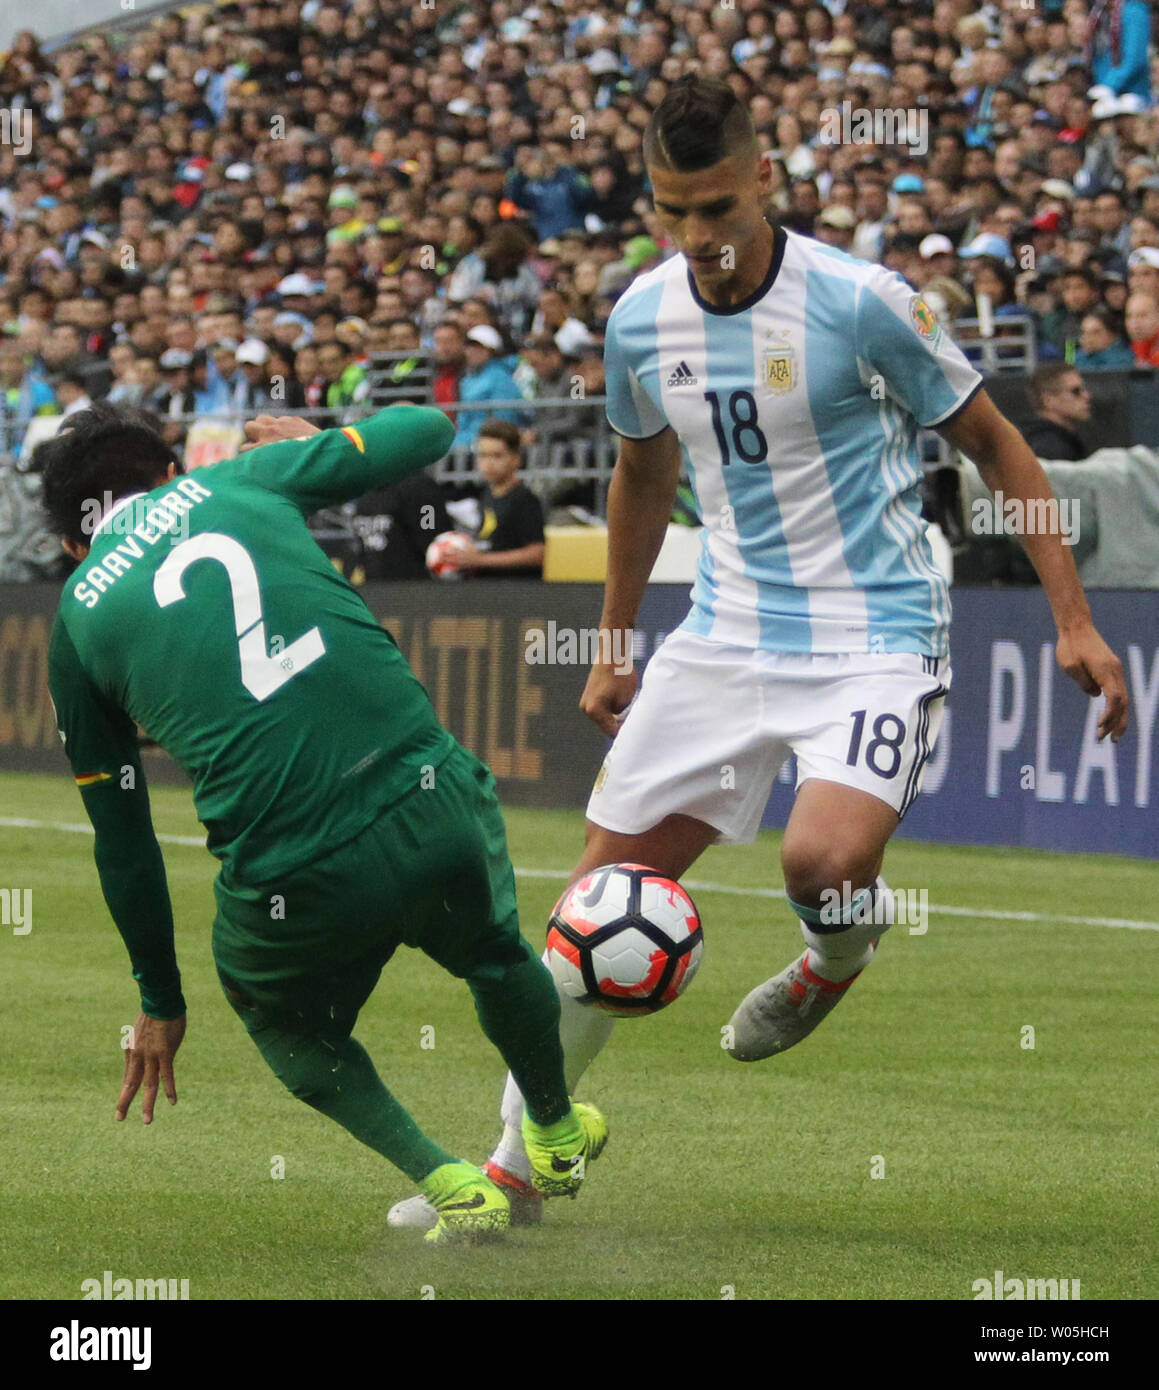 Argentina's Erik Lameia (18) kicks the ball past Bolivia's Mario Saavedra (2) in a 2016 Copa America Centenario soccer match at CenturyLink Field in Seattle, Washington on June 14, 2016.  Lameia scored a first half goal in Argentina's  3-0 win over Bolivia.   Photo by Jim Bryant/ UPI Stock Photo